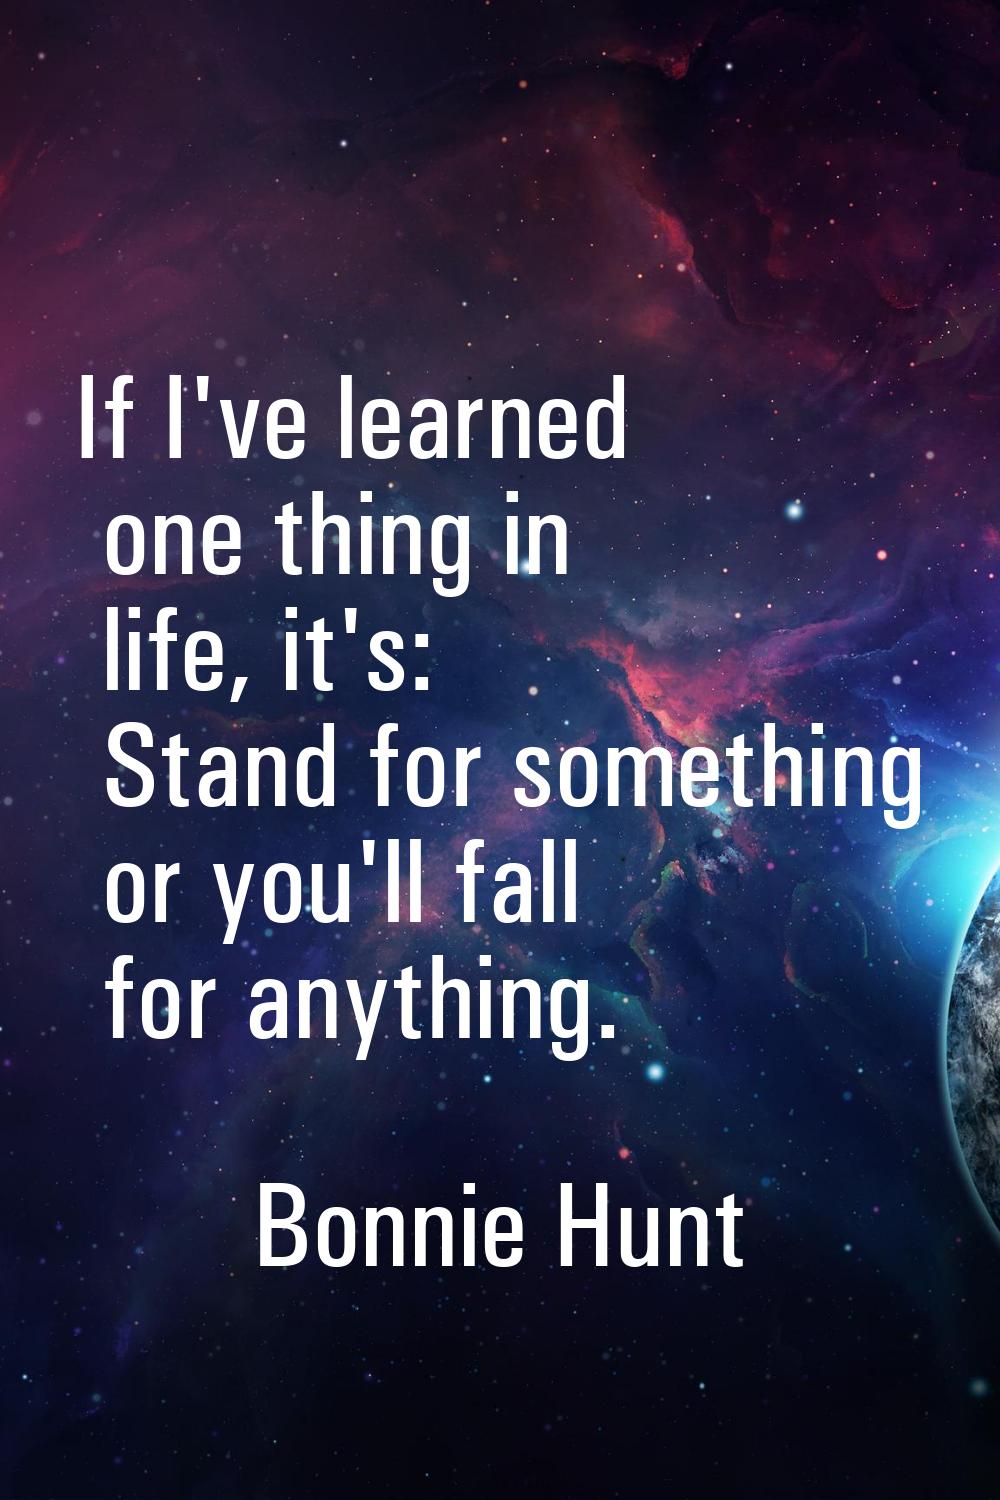 If I've learned one thing in life, it's: Stand for something or you'll fall for anything.